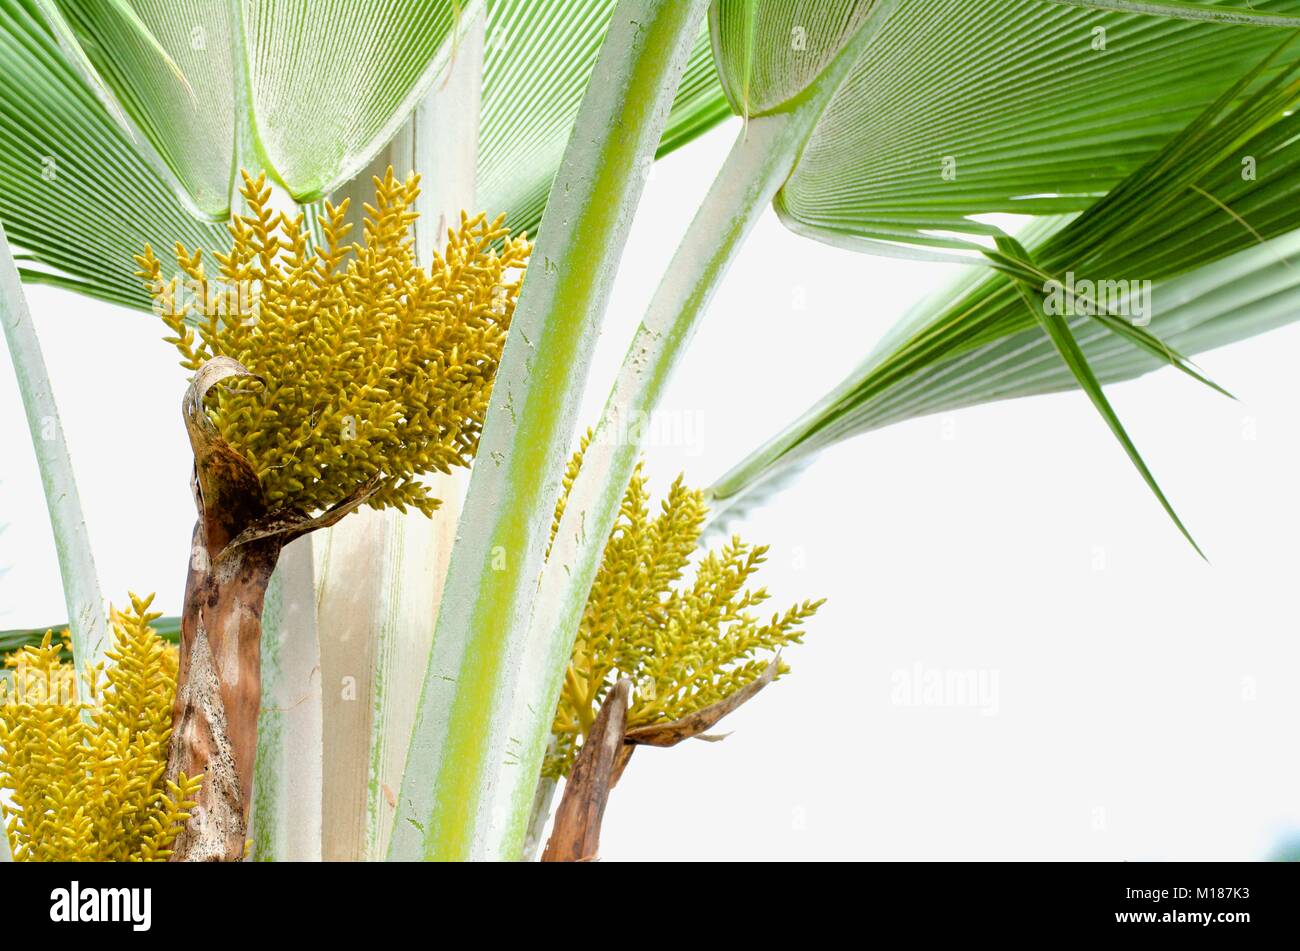 Seed and flower spikes of Pritchardia pacifica, or the Fiji Fan Palm, a species of palm tree in the genus Pritchardia Stock Photo